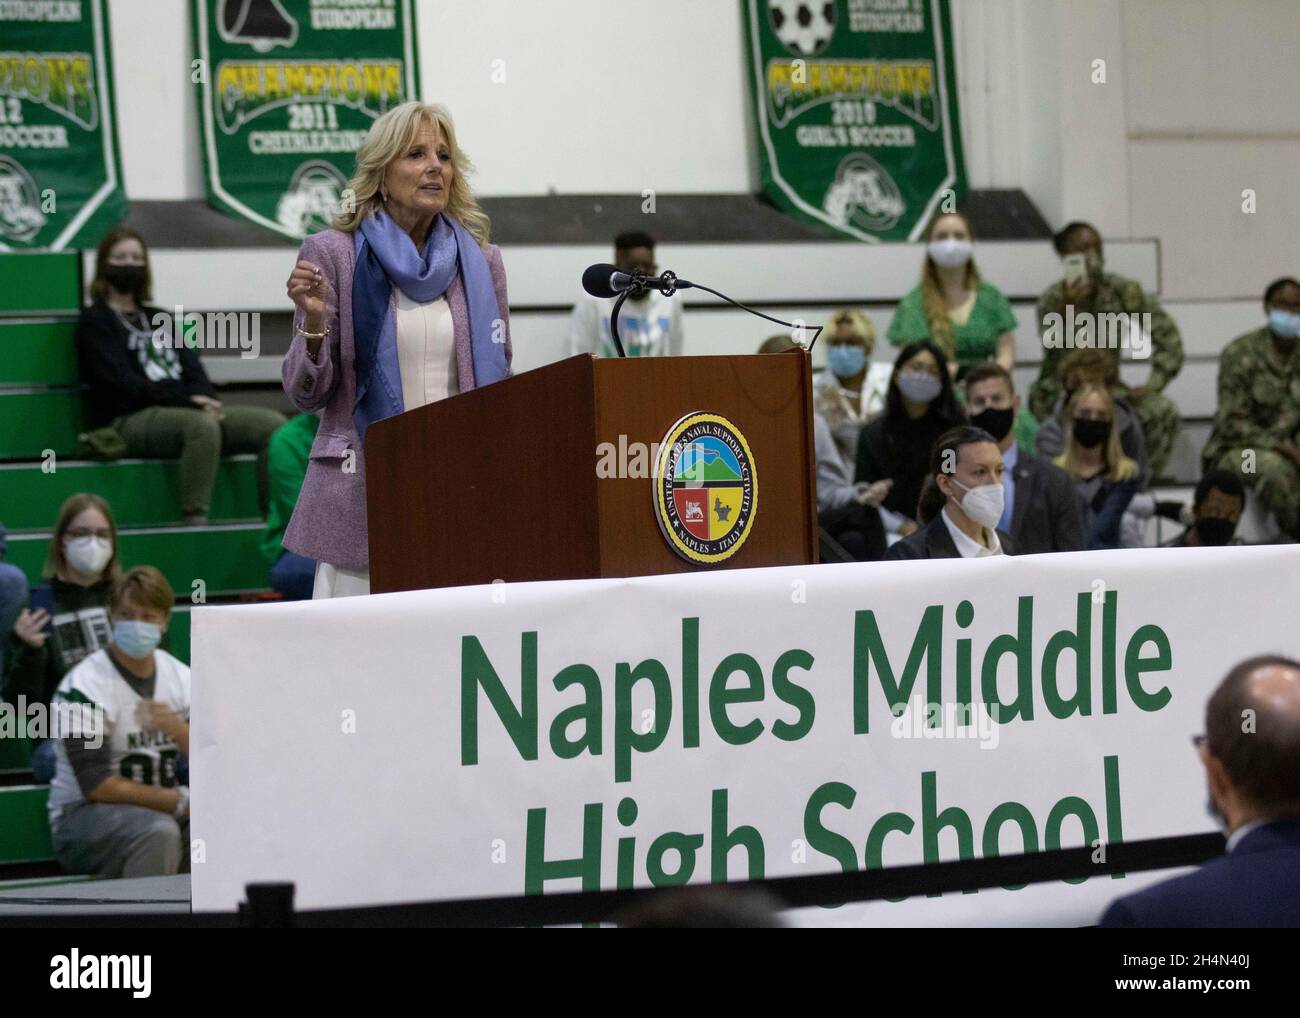 Naples, Italy. 01 November, 2021. U.S First Lady Jill Biden addresses students and teachers during a visit to Naples Middle High School at Naval Support Activity Naples November 1, 2021 in Naples, Italy. Biden visited with students, parents and community members as part of her White House initiative Joining Forces, a program that supports military and veteran families.  Credit: MC1 Fred Gray IV/U.S. Navy Photo/Alamy Live News Stock Photo